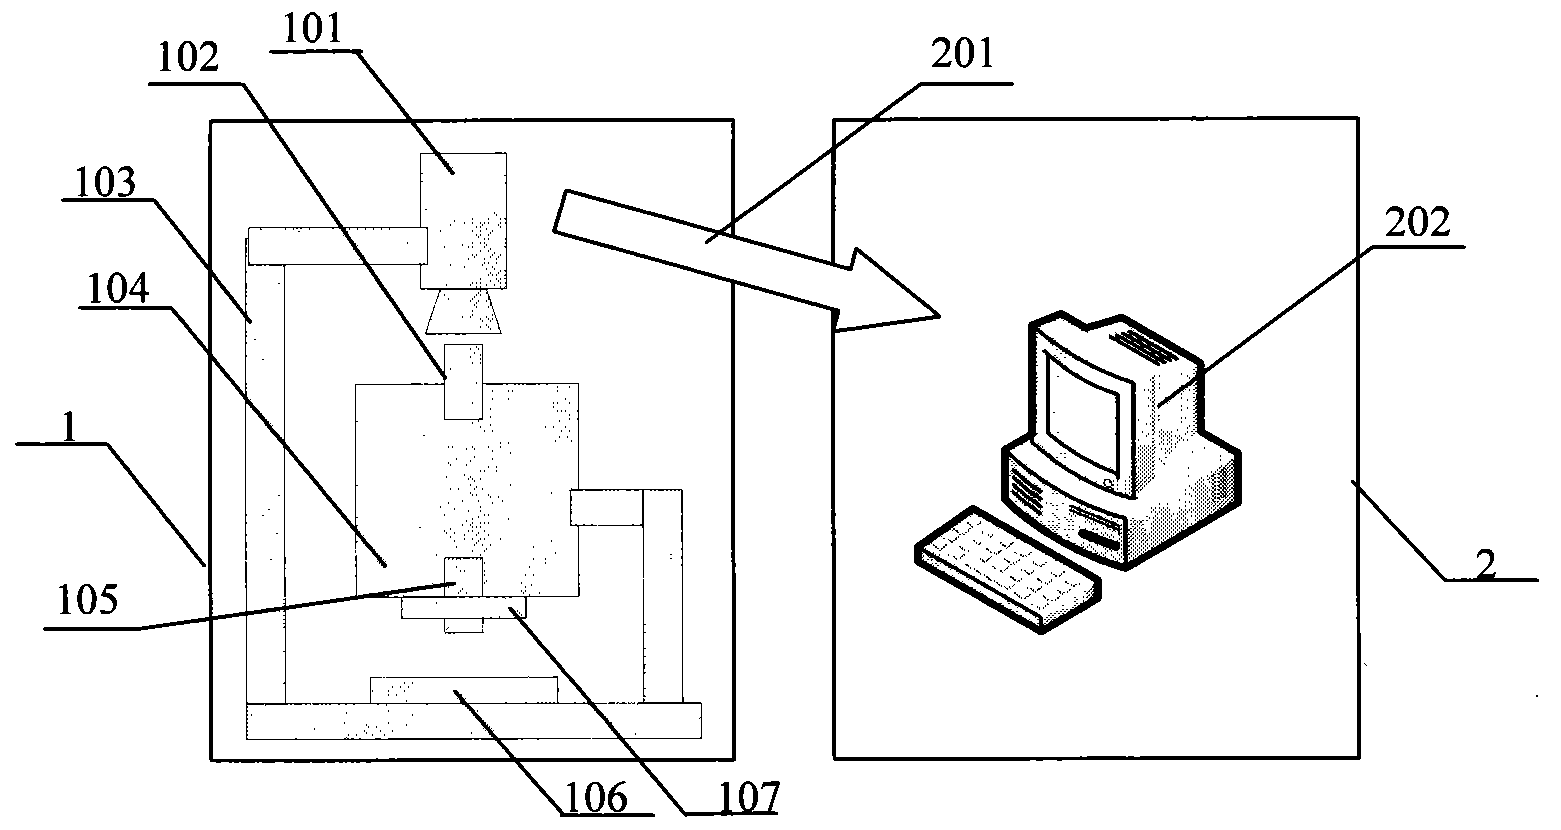 Soldered ball surface defect detection device and method based on machine vision